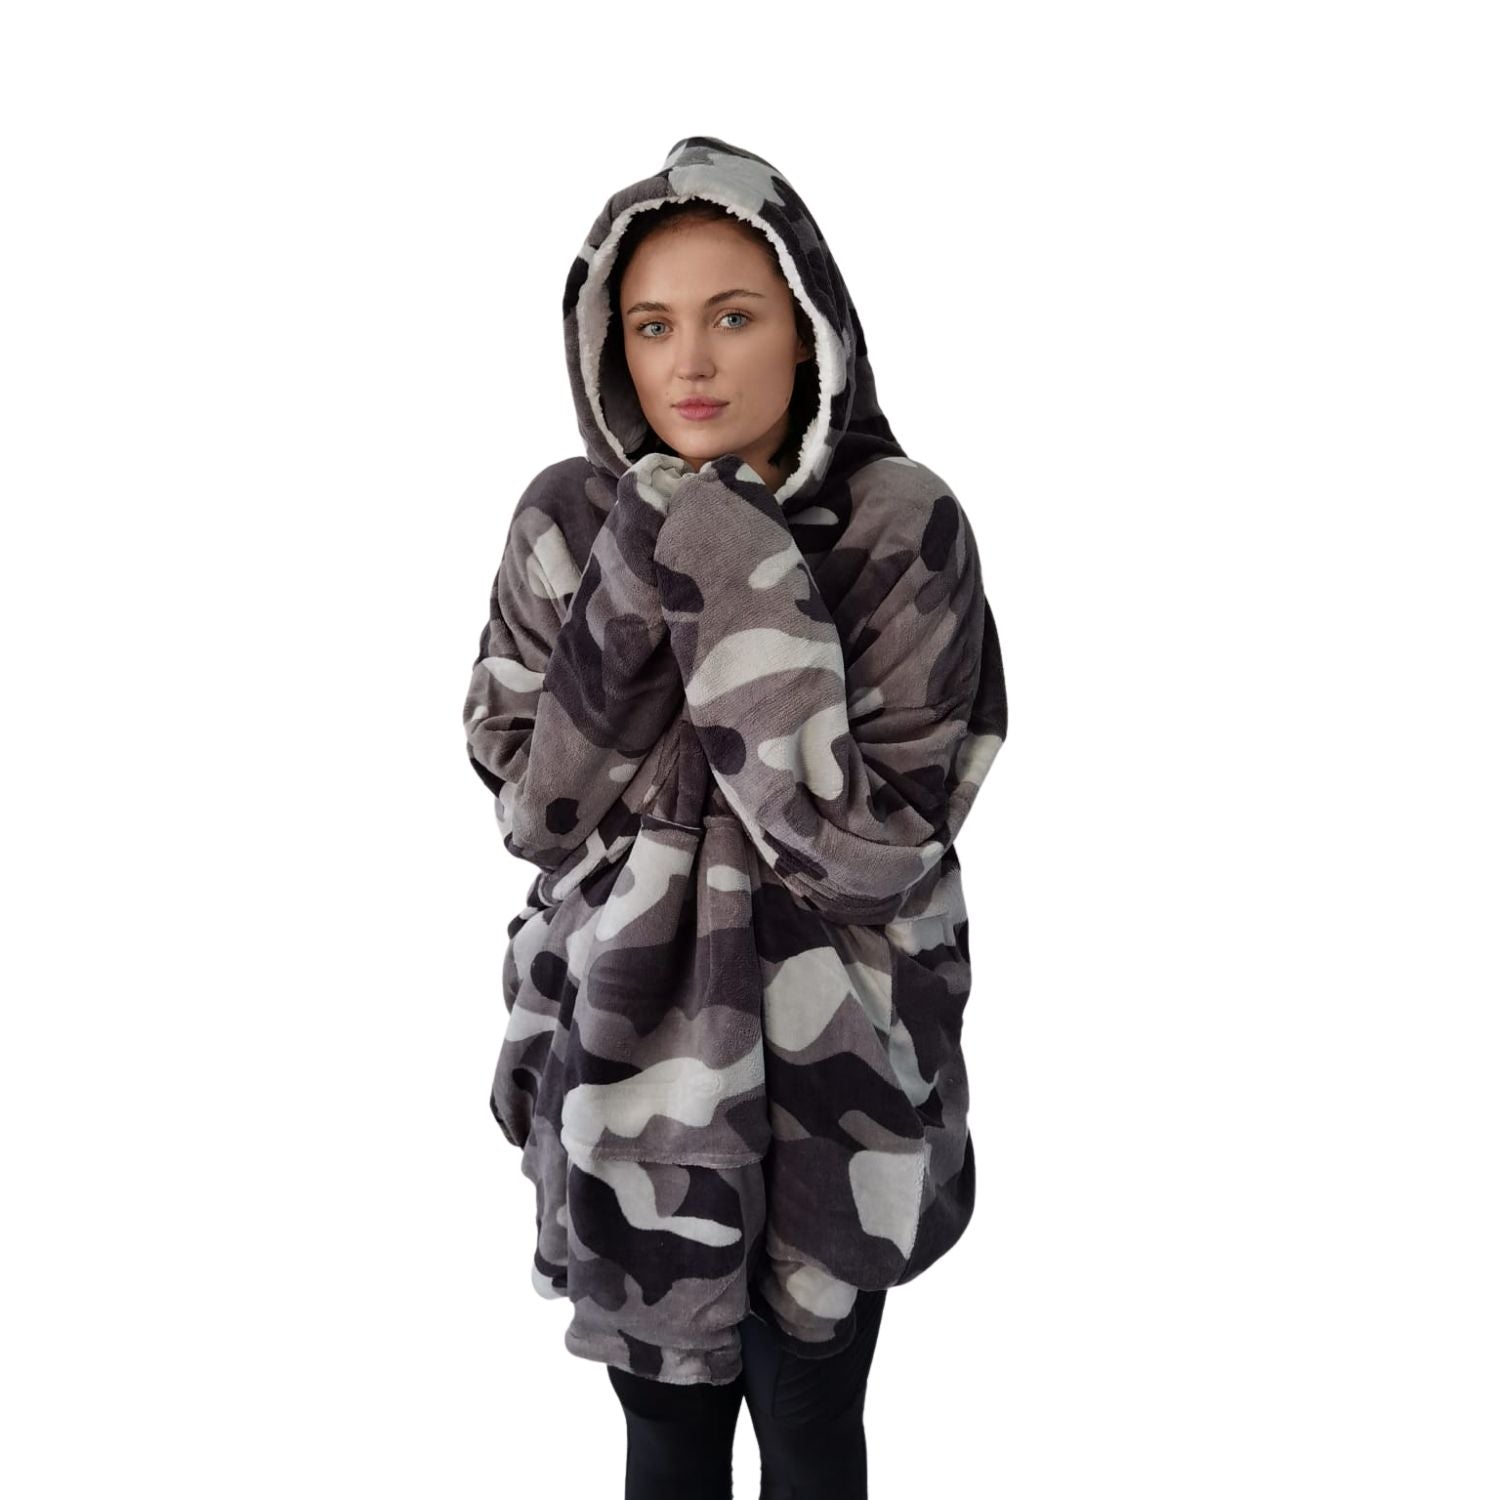 The Home Bedroom Cosy Robe - Camouflage Grey 2 Shaws Department Stores